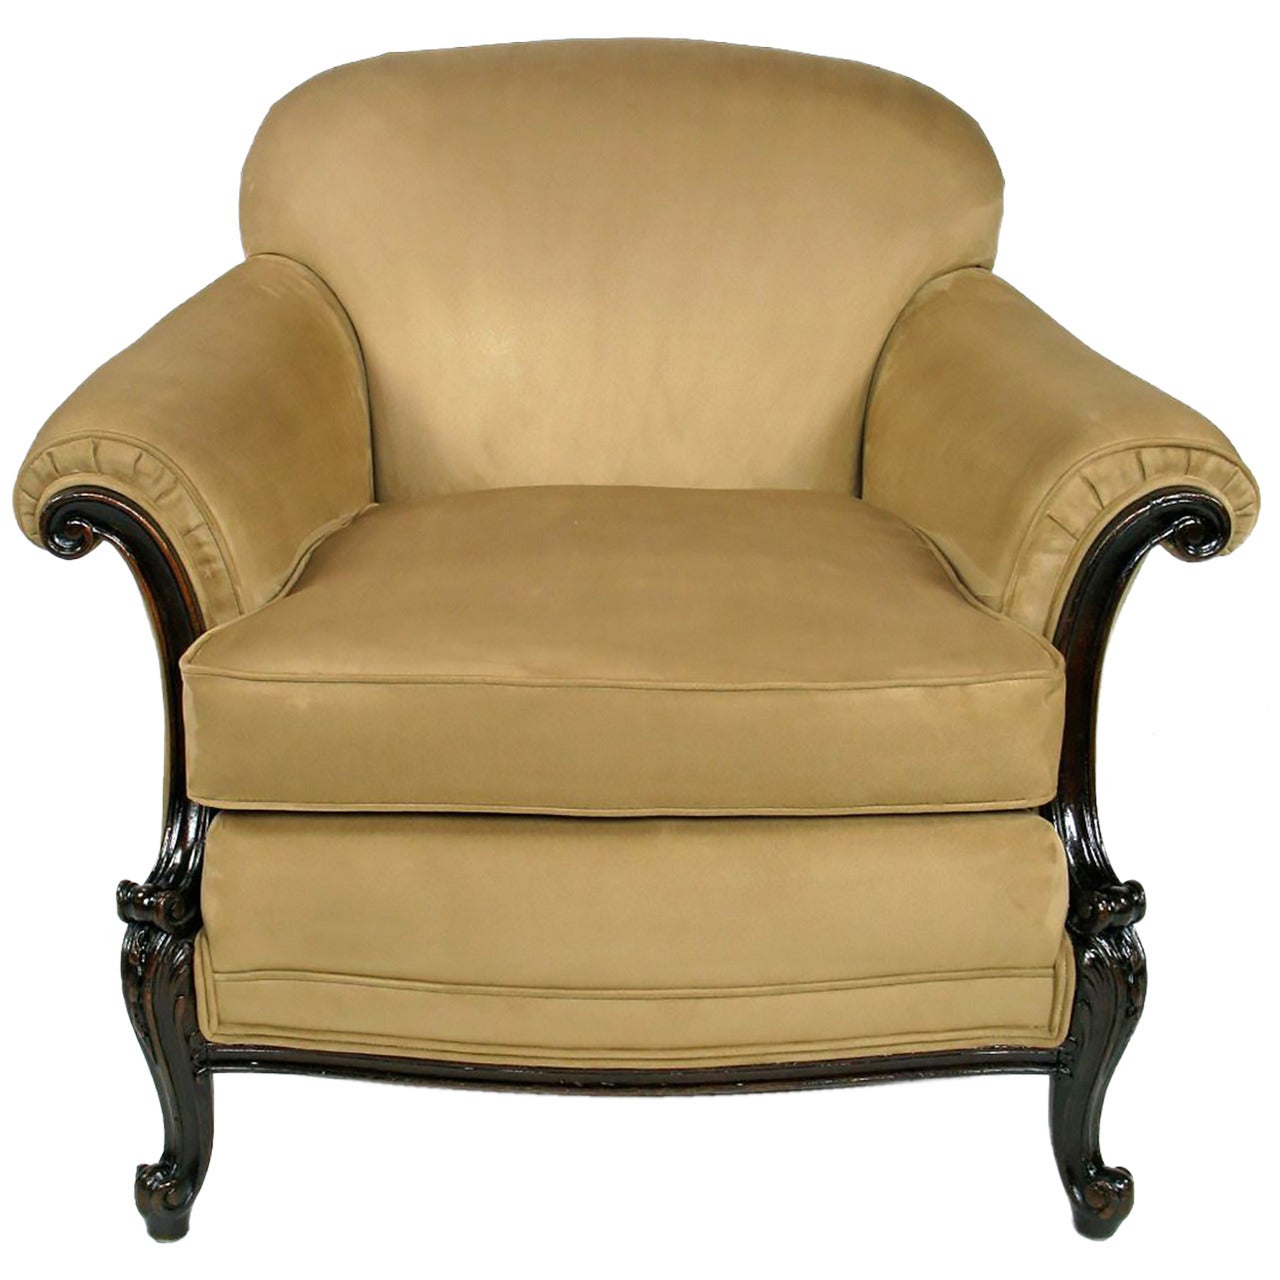 Early 20th Century, Rolled-Arm Club Chair in Ultrasuede